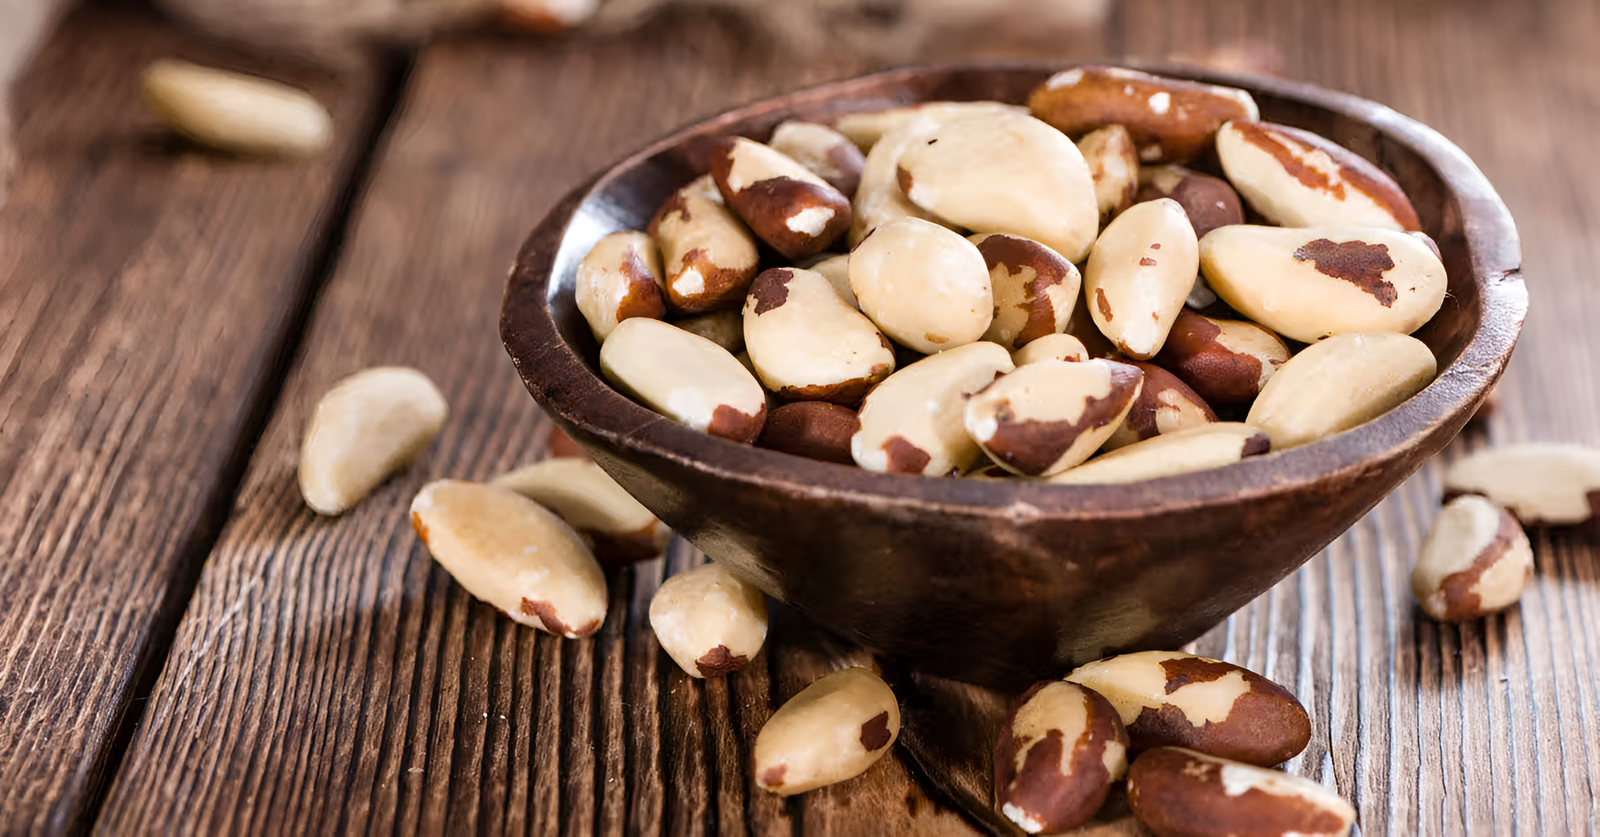 Top 7 Brazil Nuts Benefits: Nutrients And Potential Risks